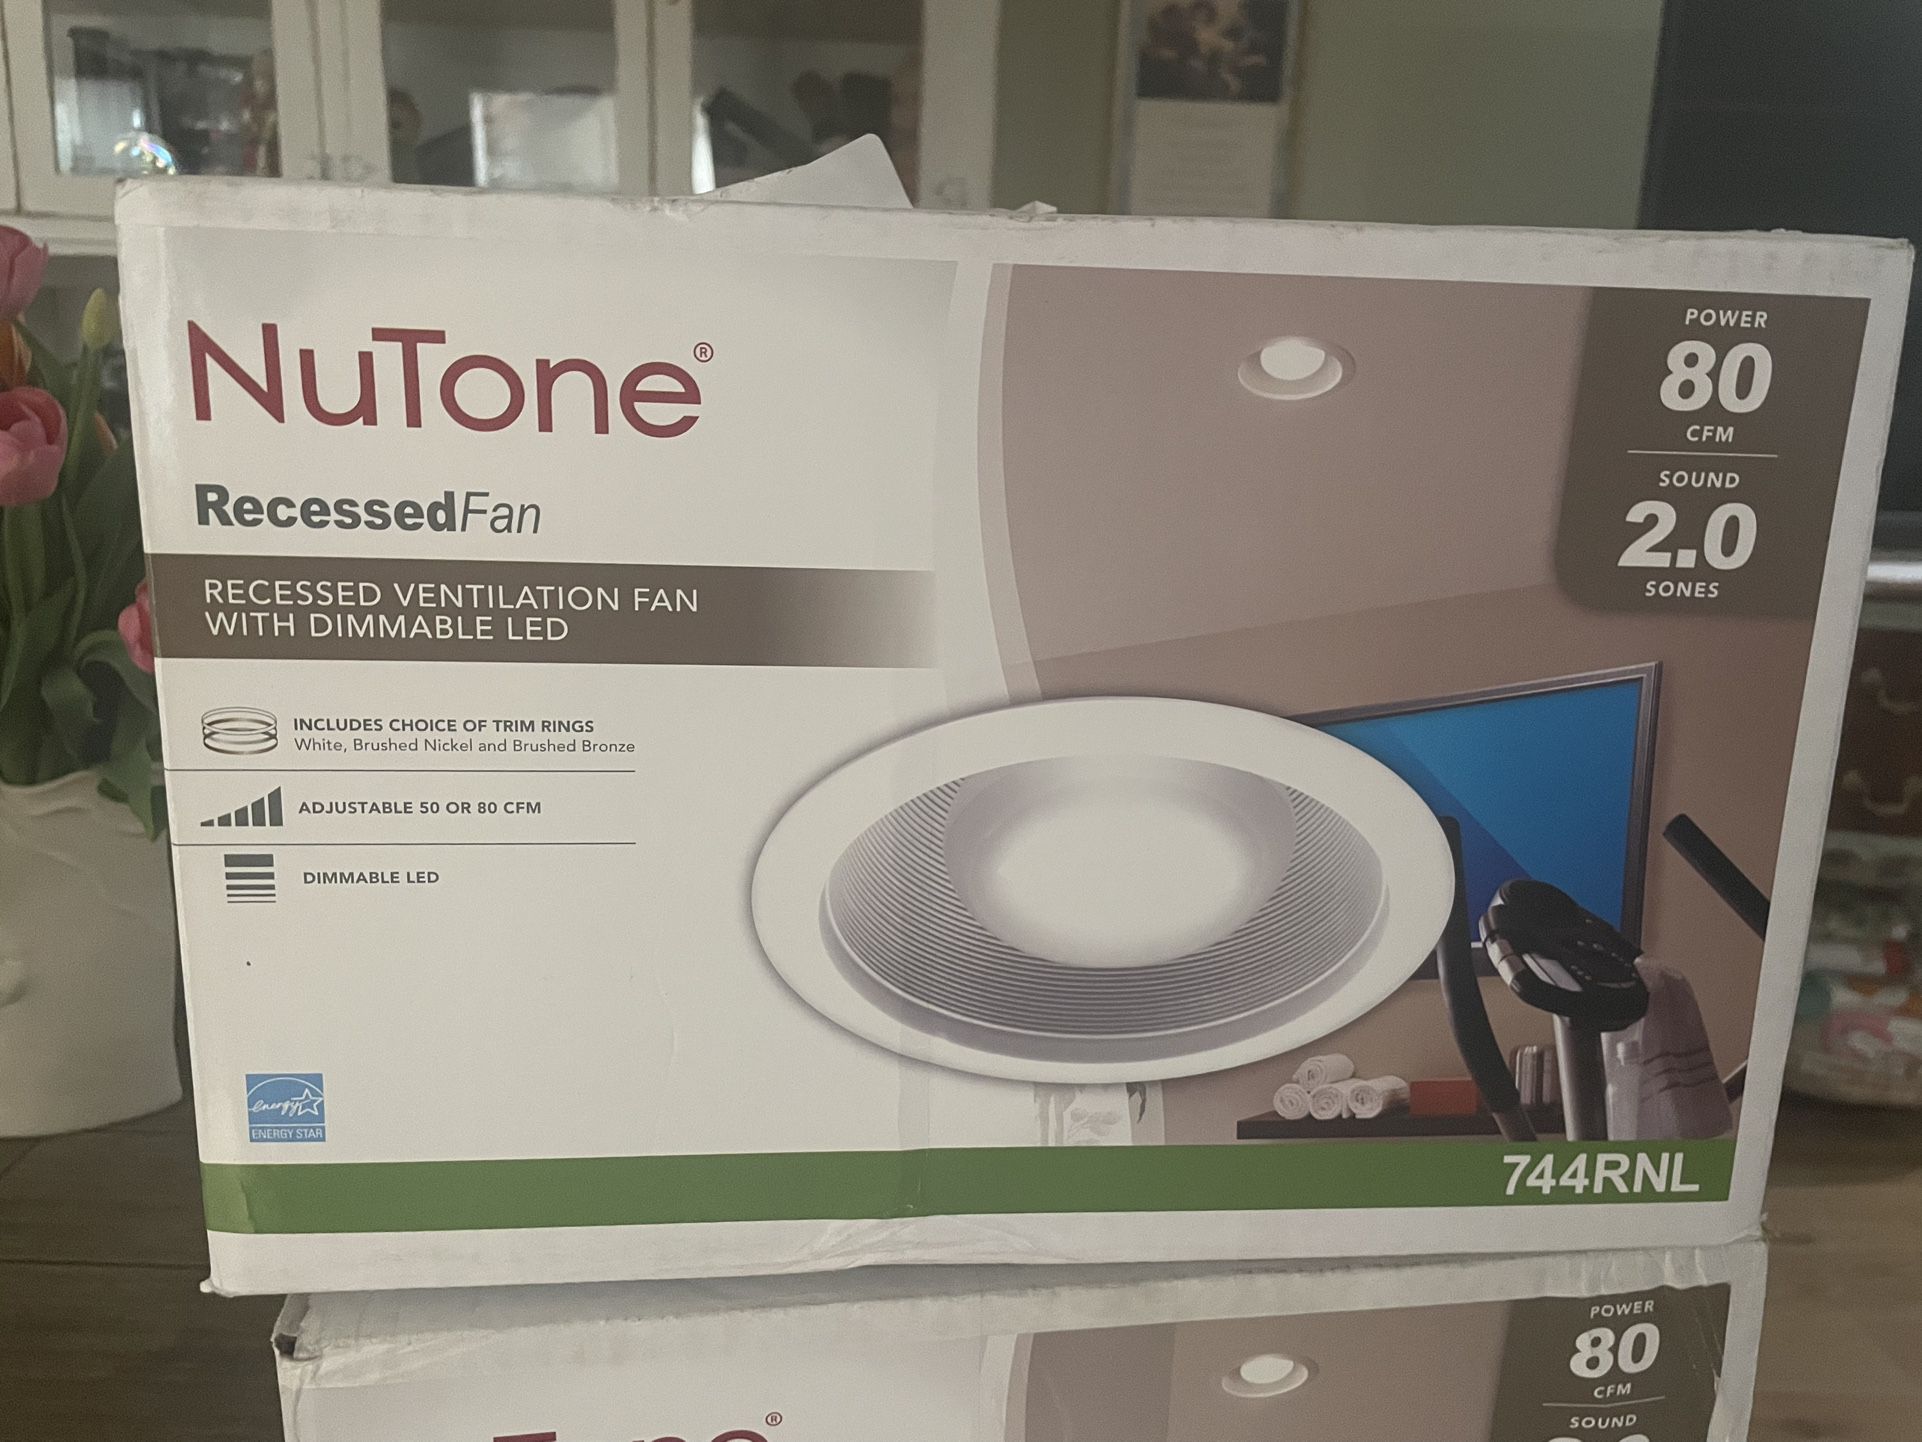 Nutone Recessed Ventilation Lights With Dimmable Options 